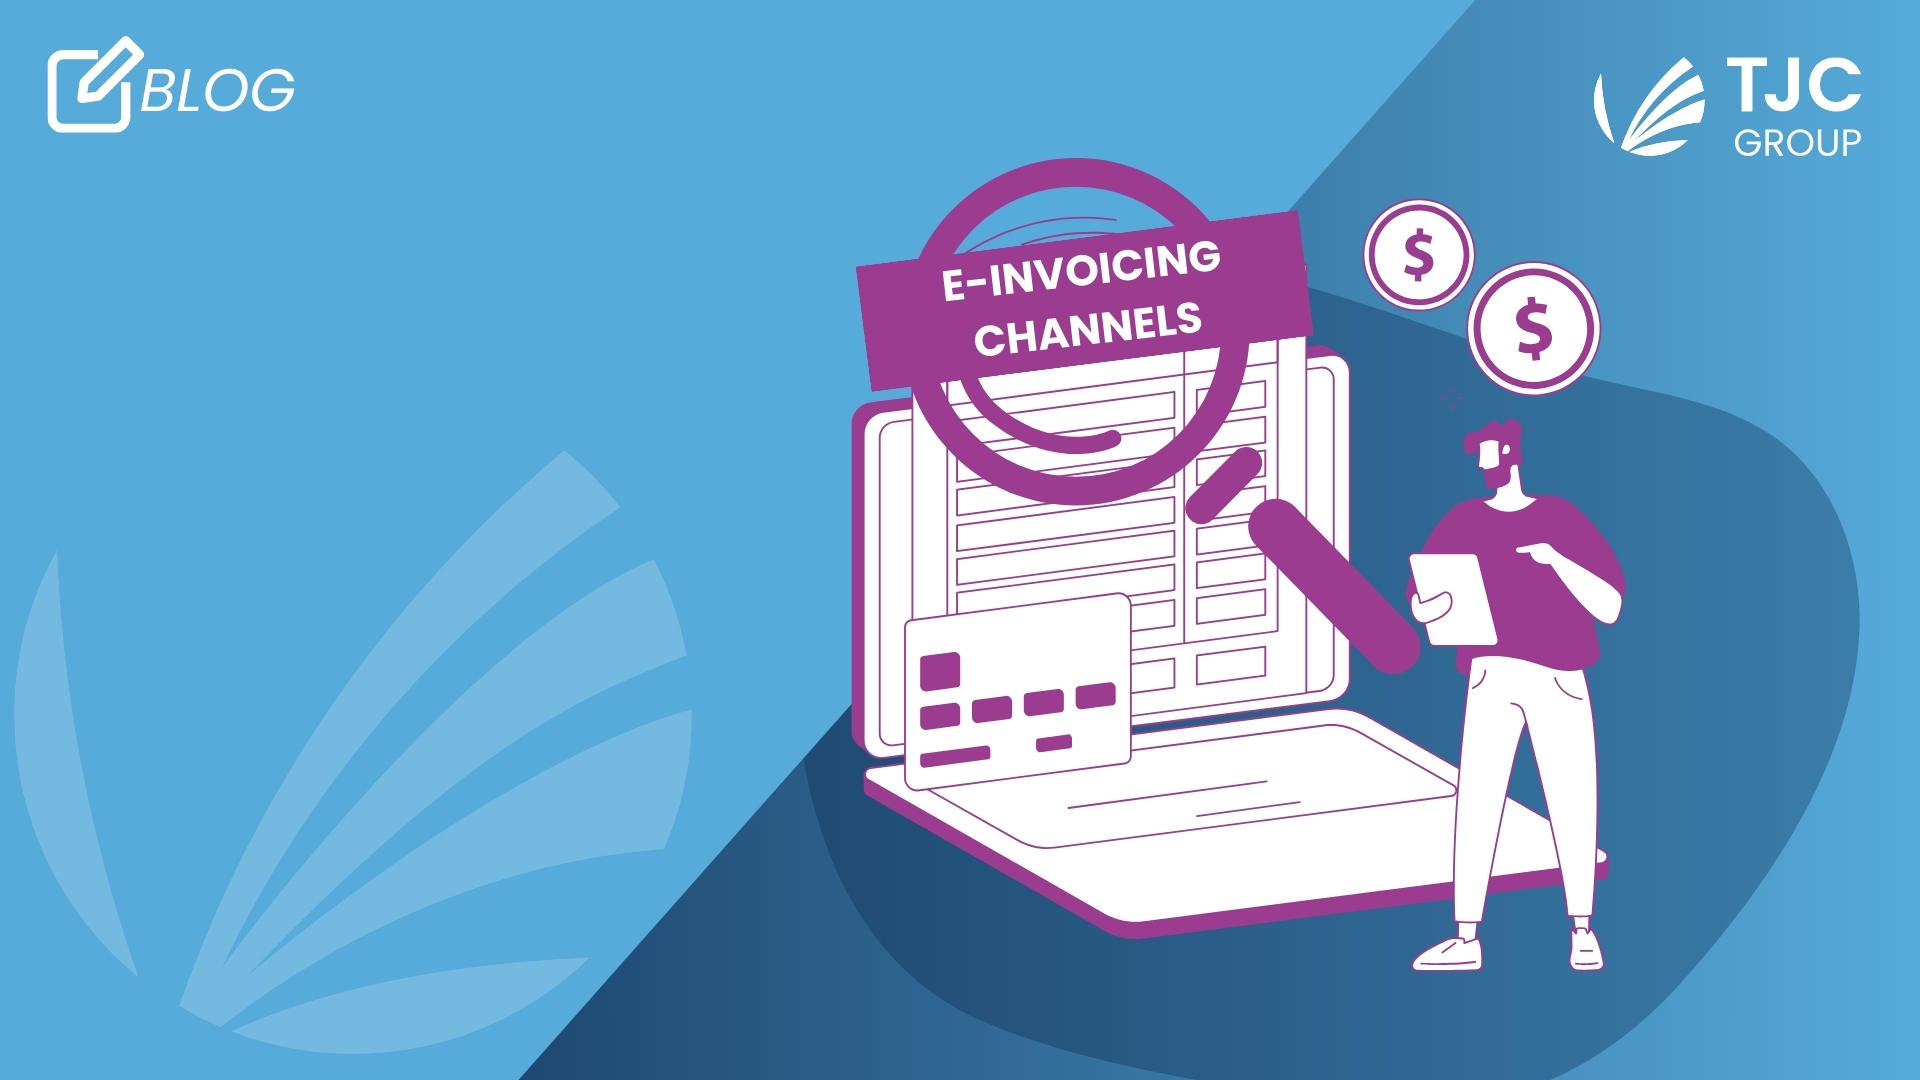 e-invoicing channels that you must know of